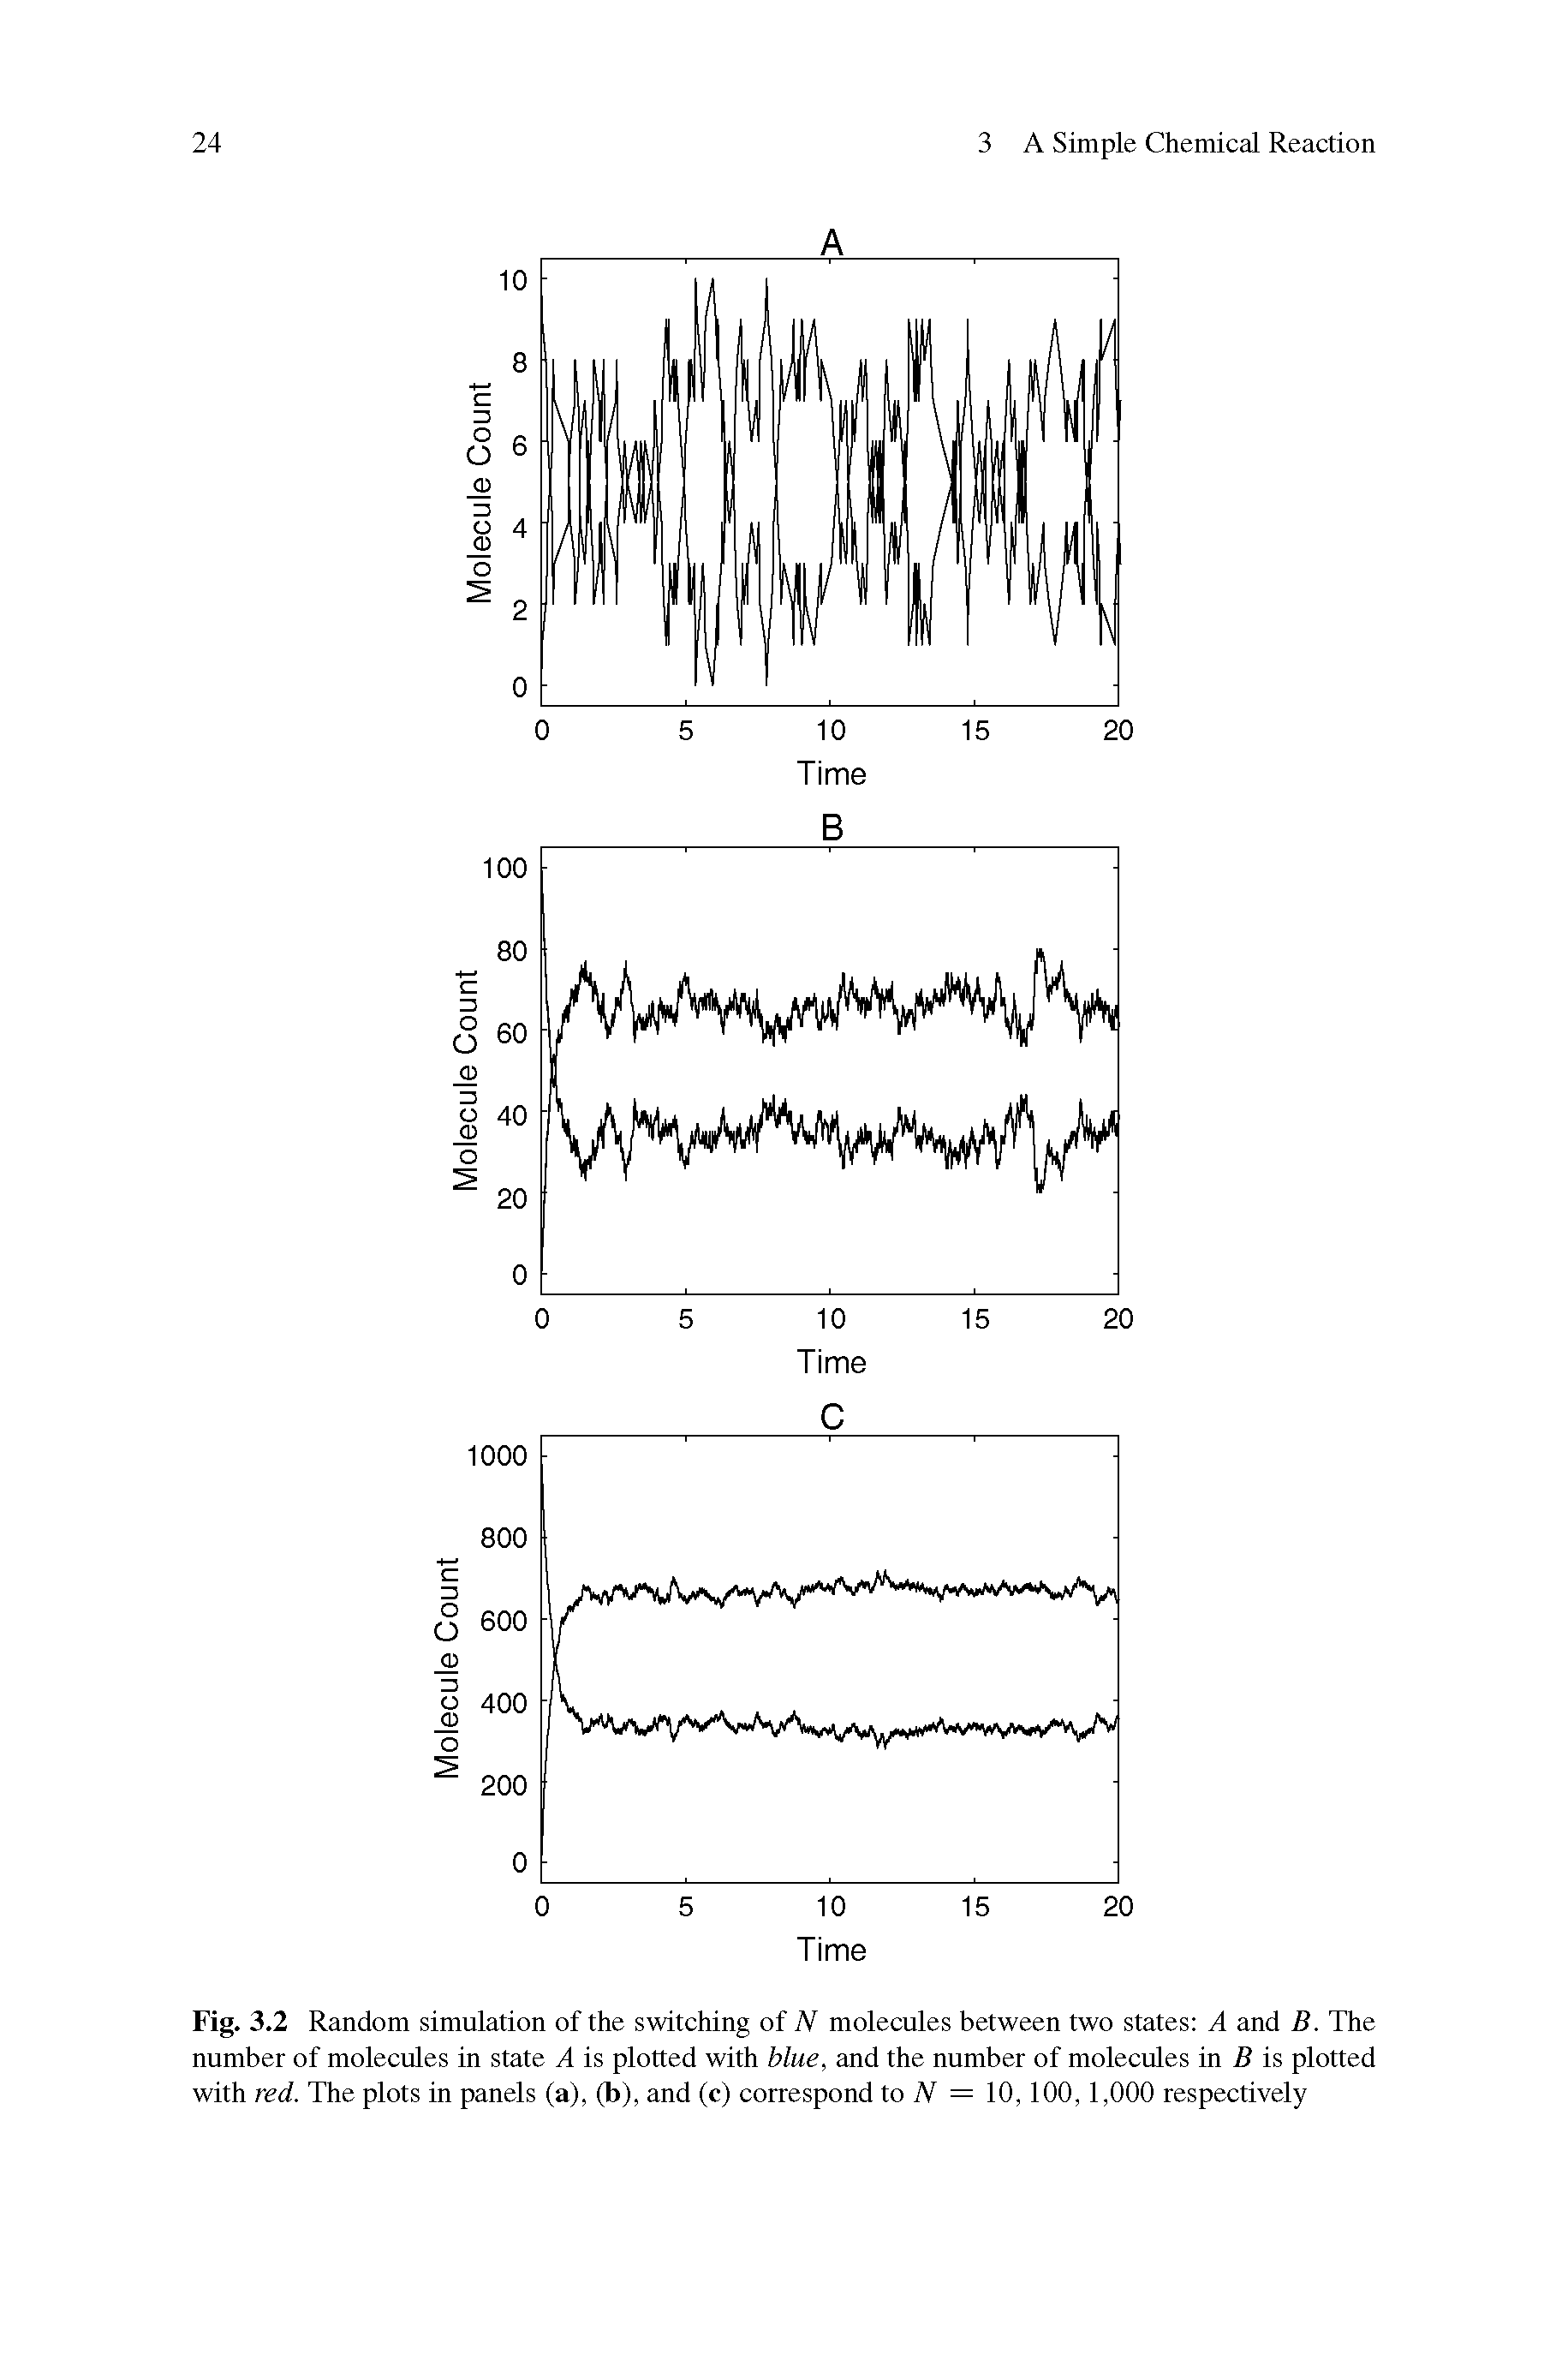 Fig. 3.2 Random simulation of the switching of N molecules between two states A and B. The number of molecules in state A is plotted with blue, and the number of molecules in B is plotted with red. The plots in panels (a), (b), and (c) correspond to = 10, 100, 1,000 respectively...